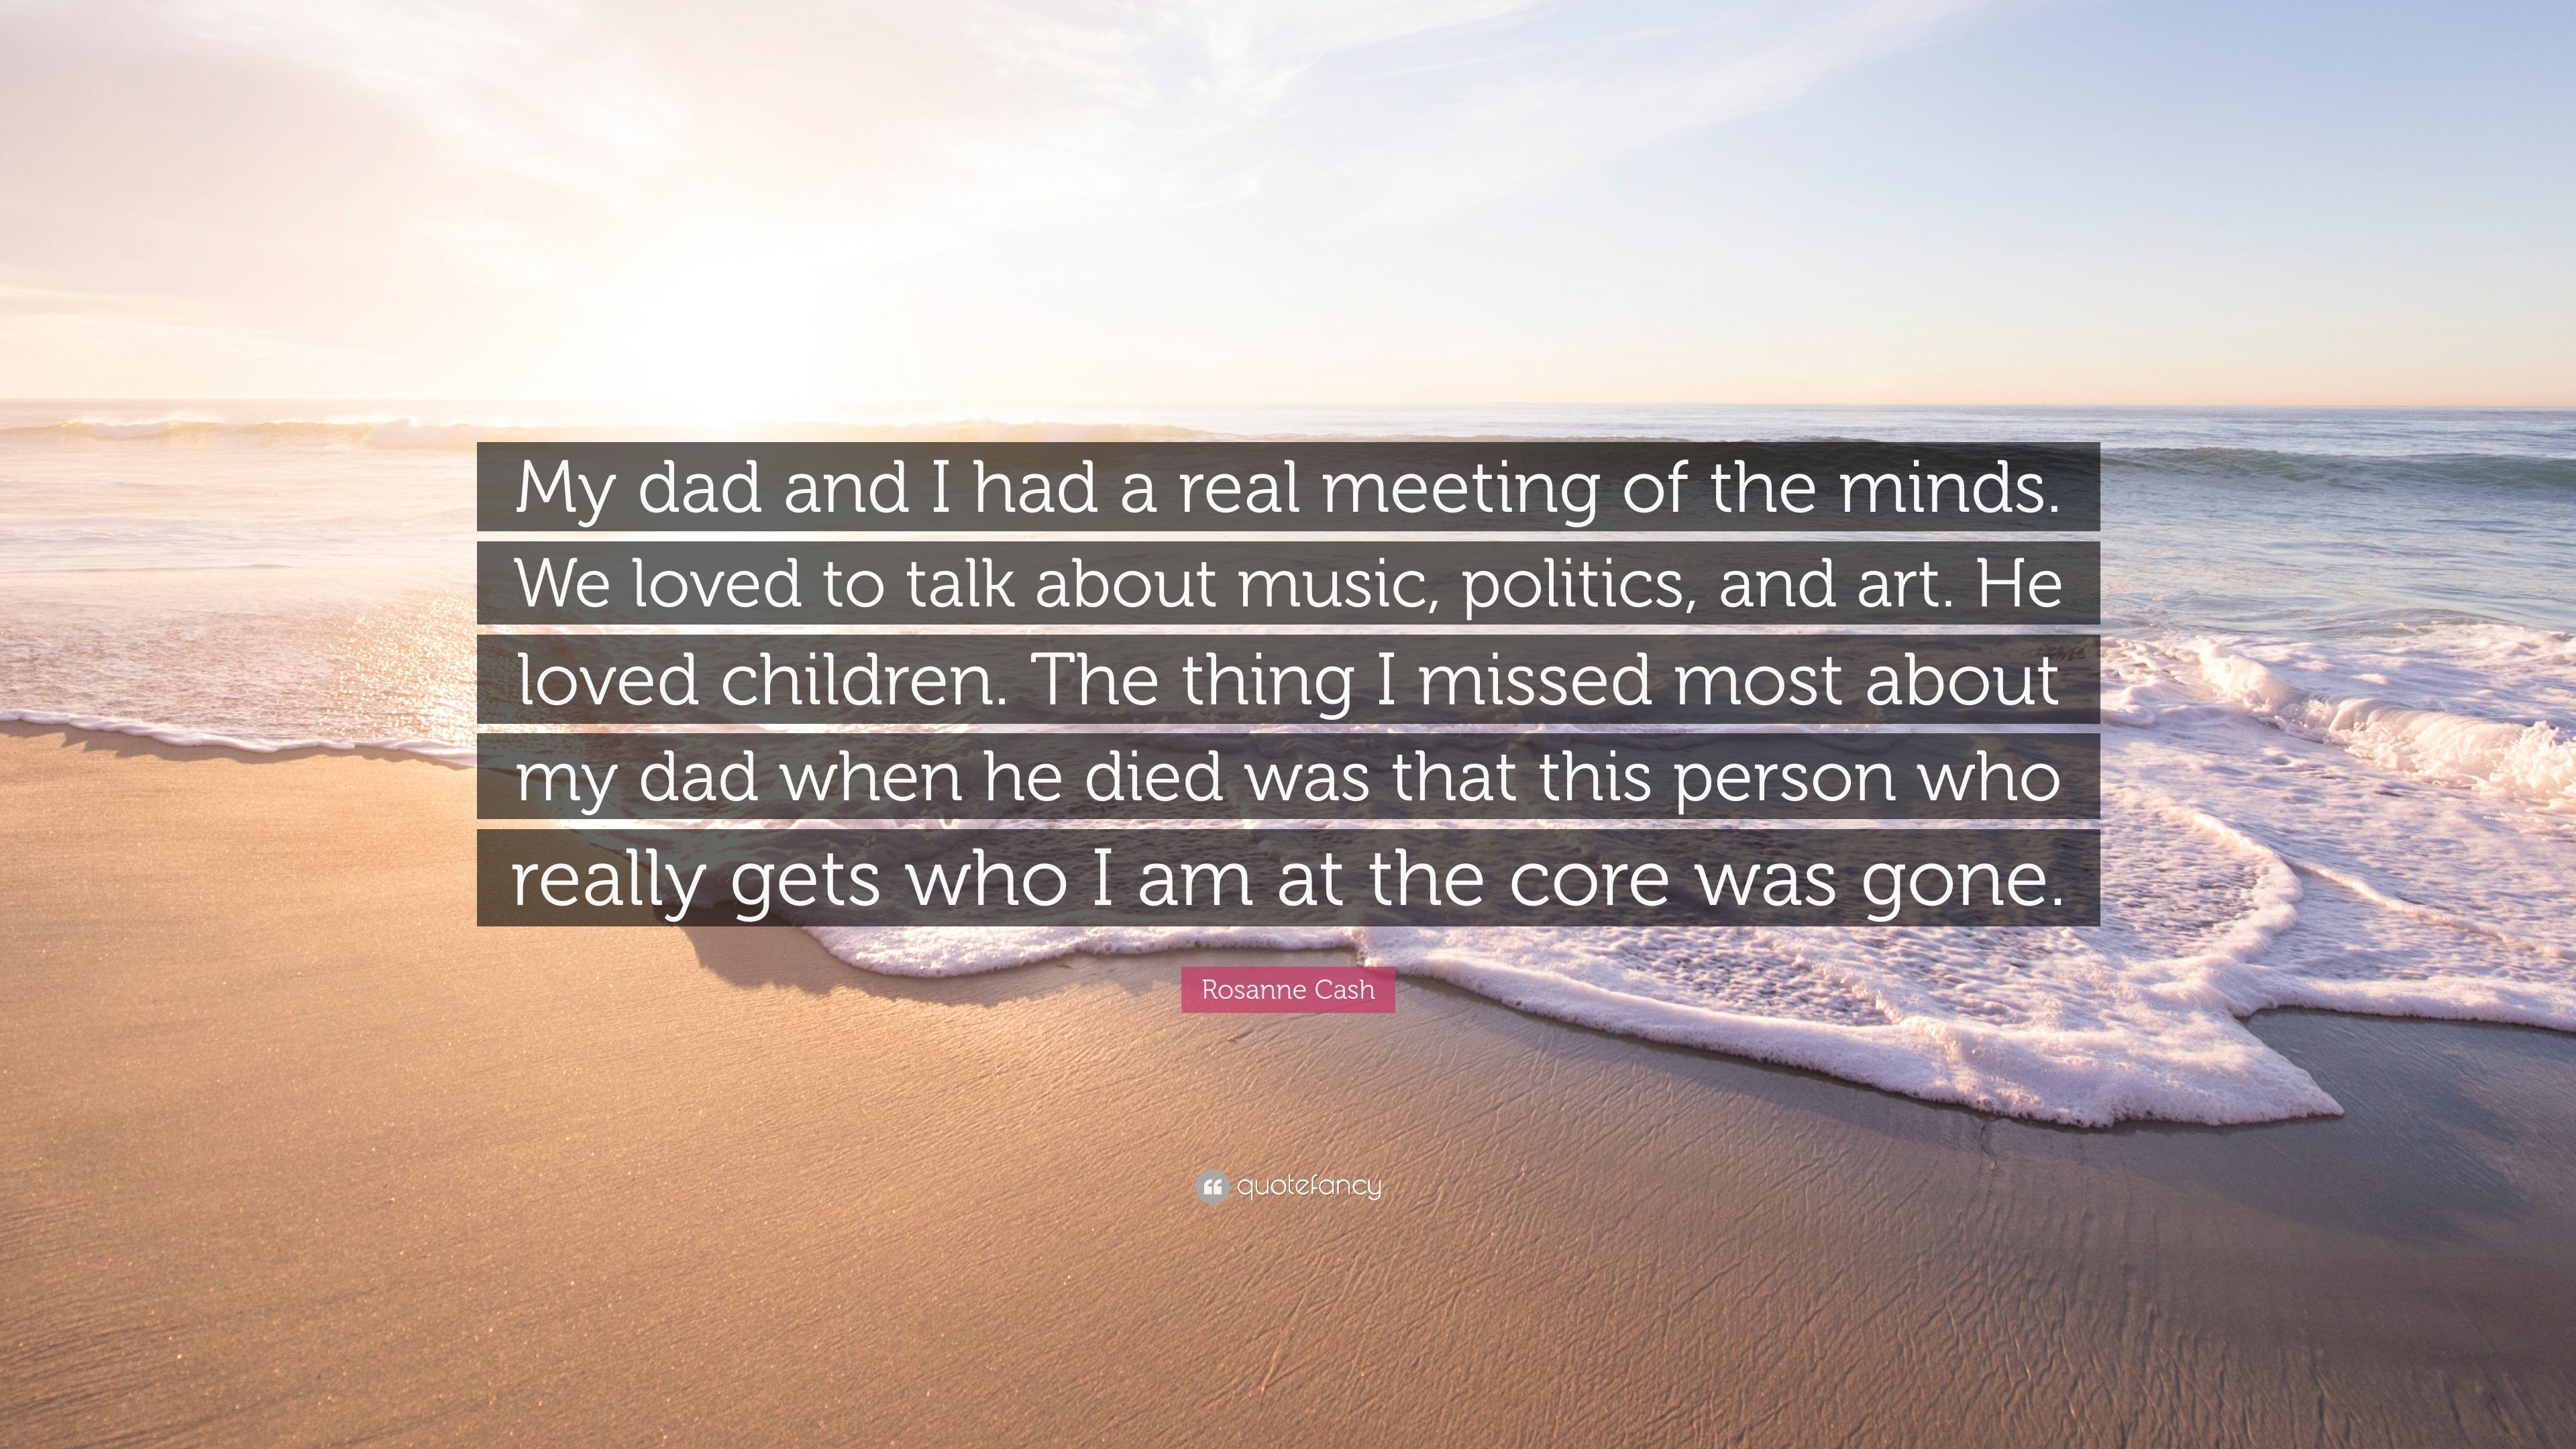 3840x2160 Rosanne Cash Quote: “My dad and I had a real meeting of the minds